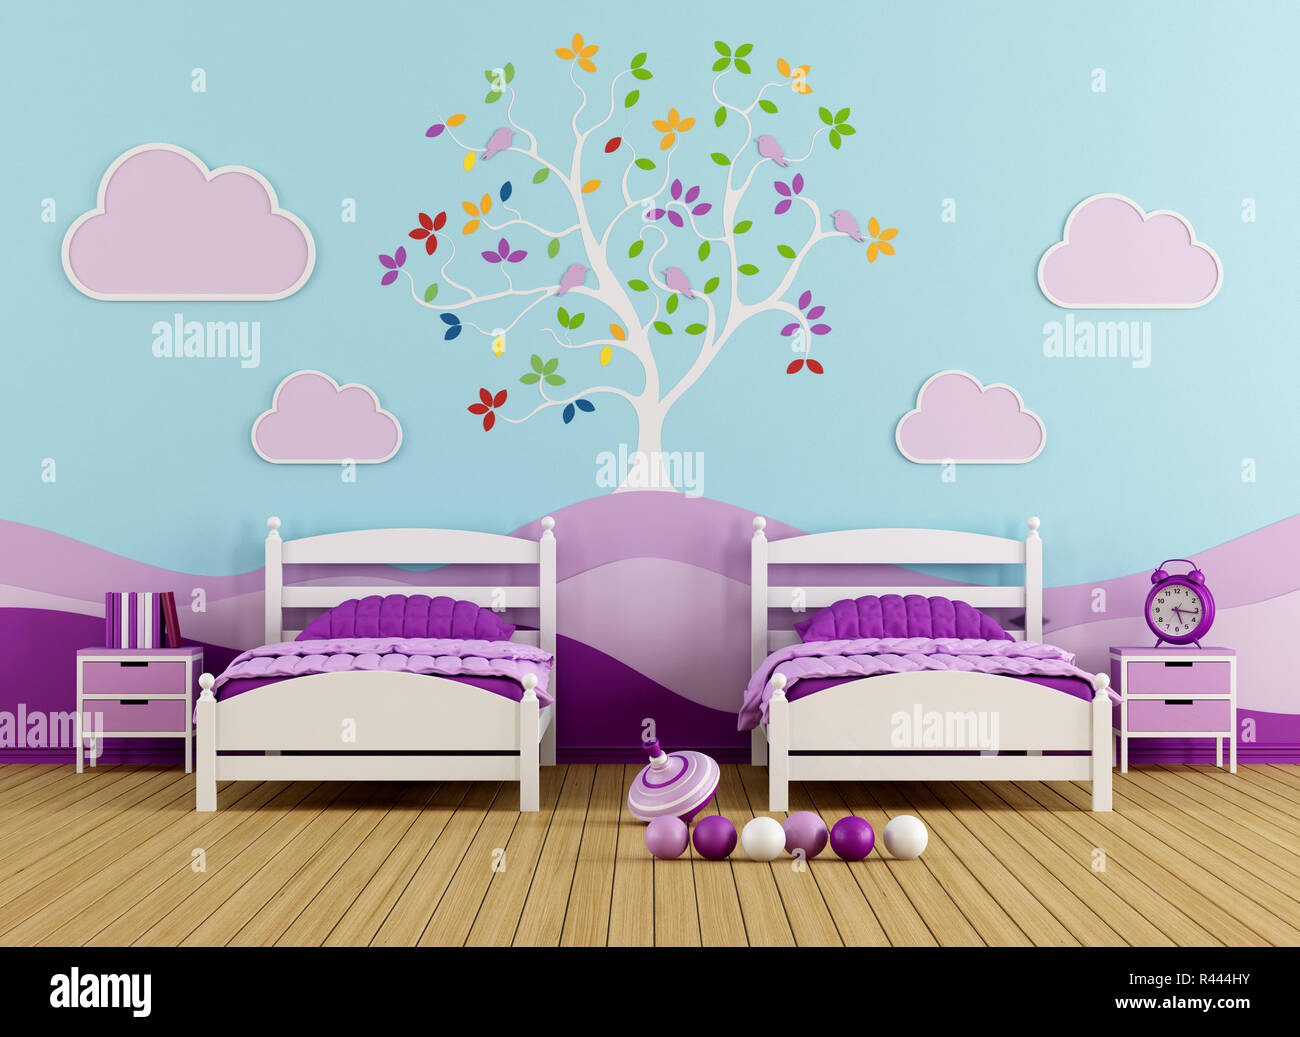 Colorful bedroom for girl Stock Photo